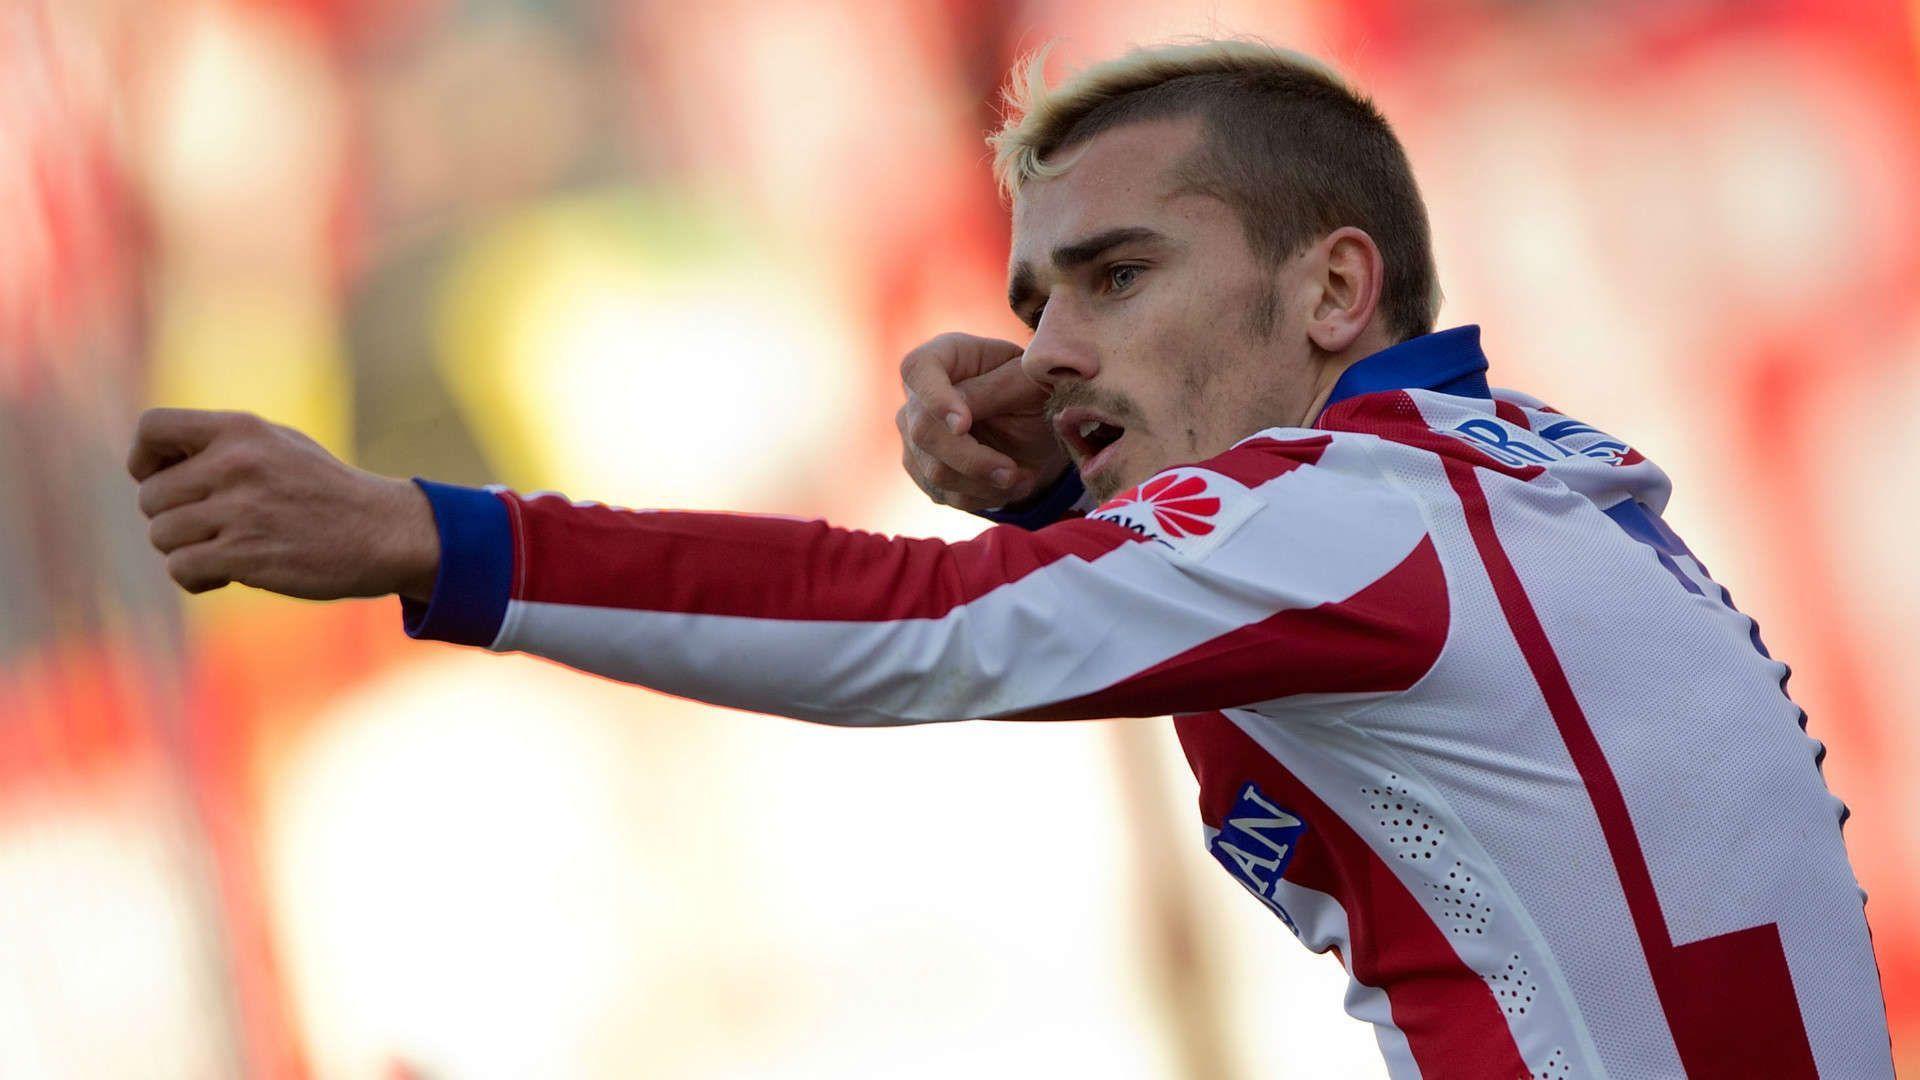 Antoine Griezmann 1080p Full HD Photo And Wallpaper